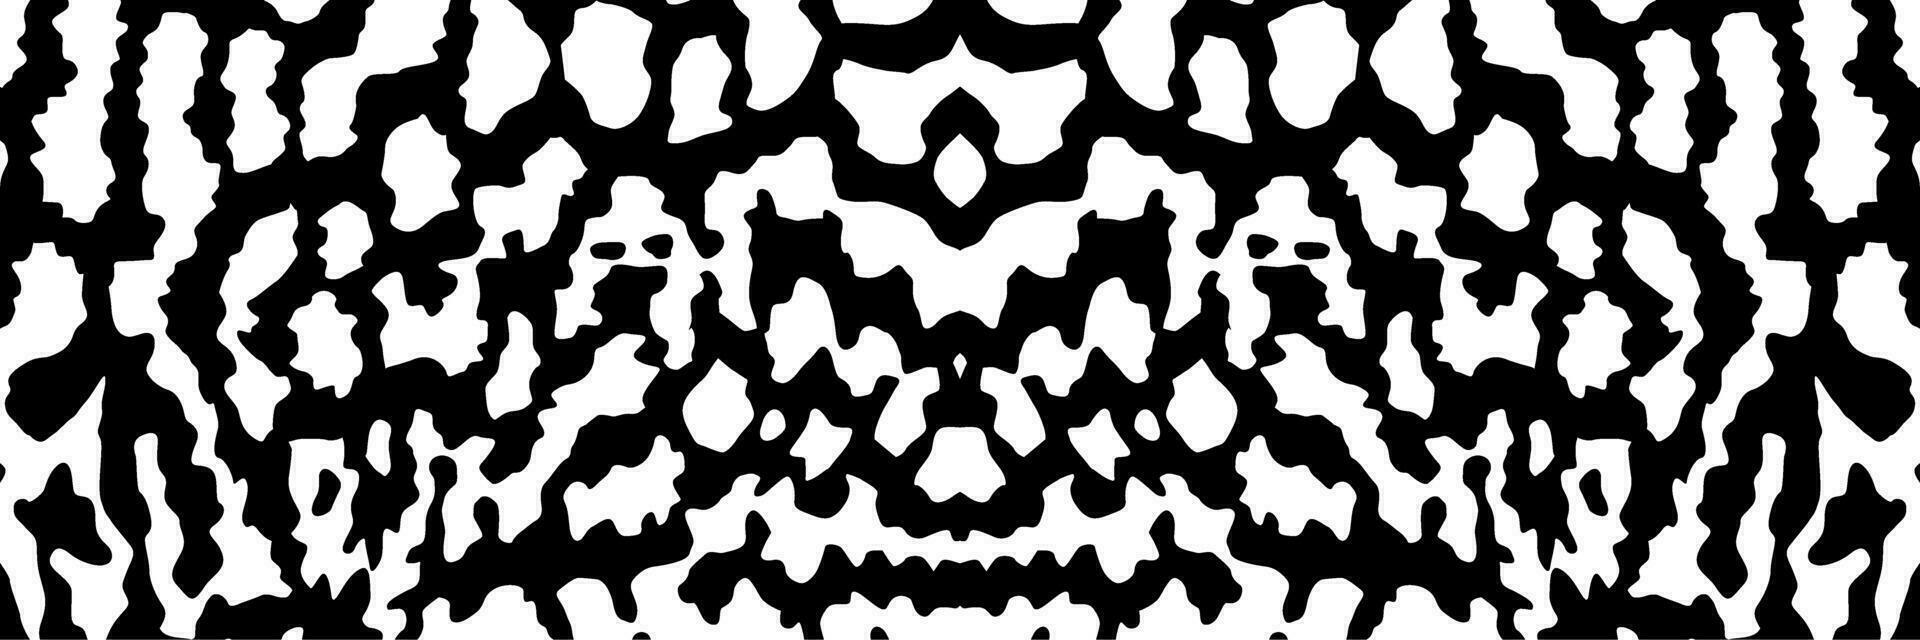 Artistic Motifs Pattern Inspired by Symphysodon or Discus Fish Skin, for decoration, ornate, background, website, wallpaper, fashion, interior, cover, animal print, or graphic design element vector